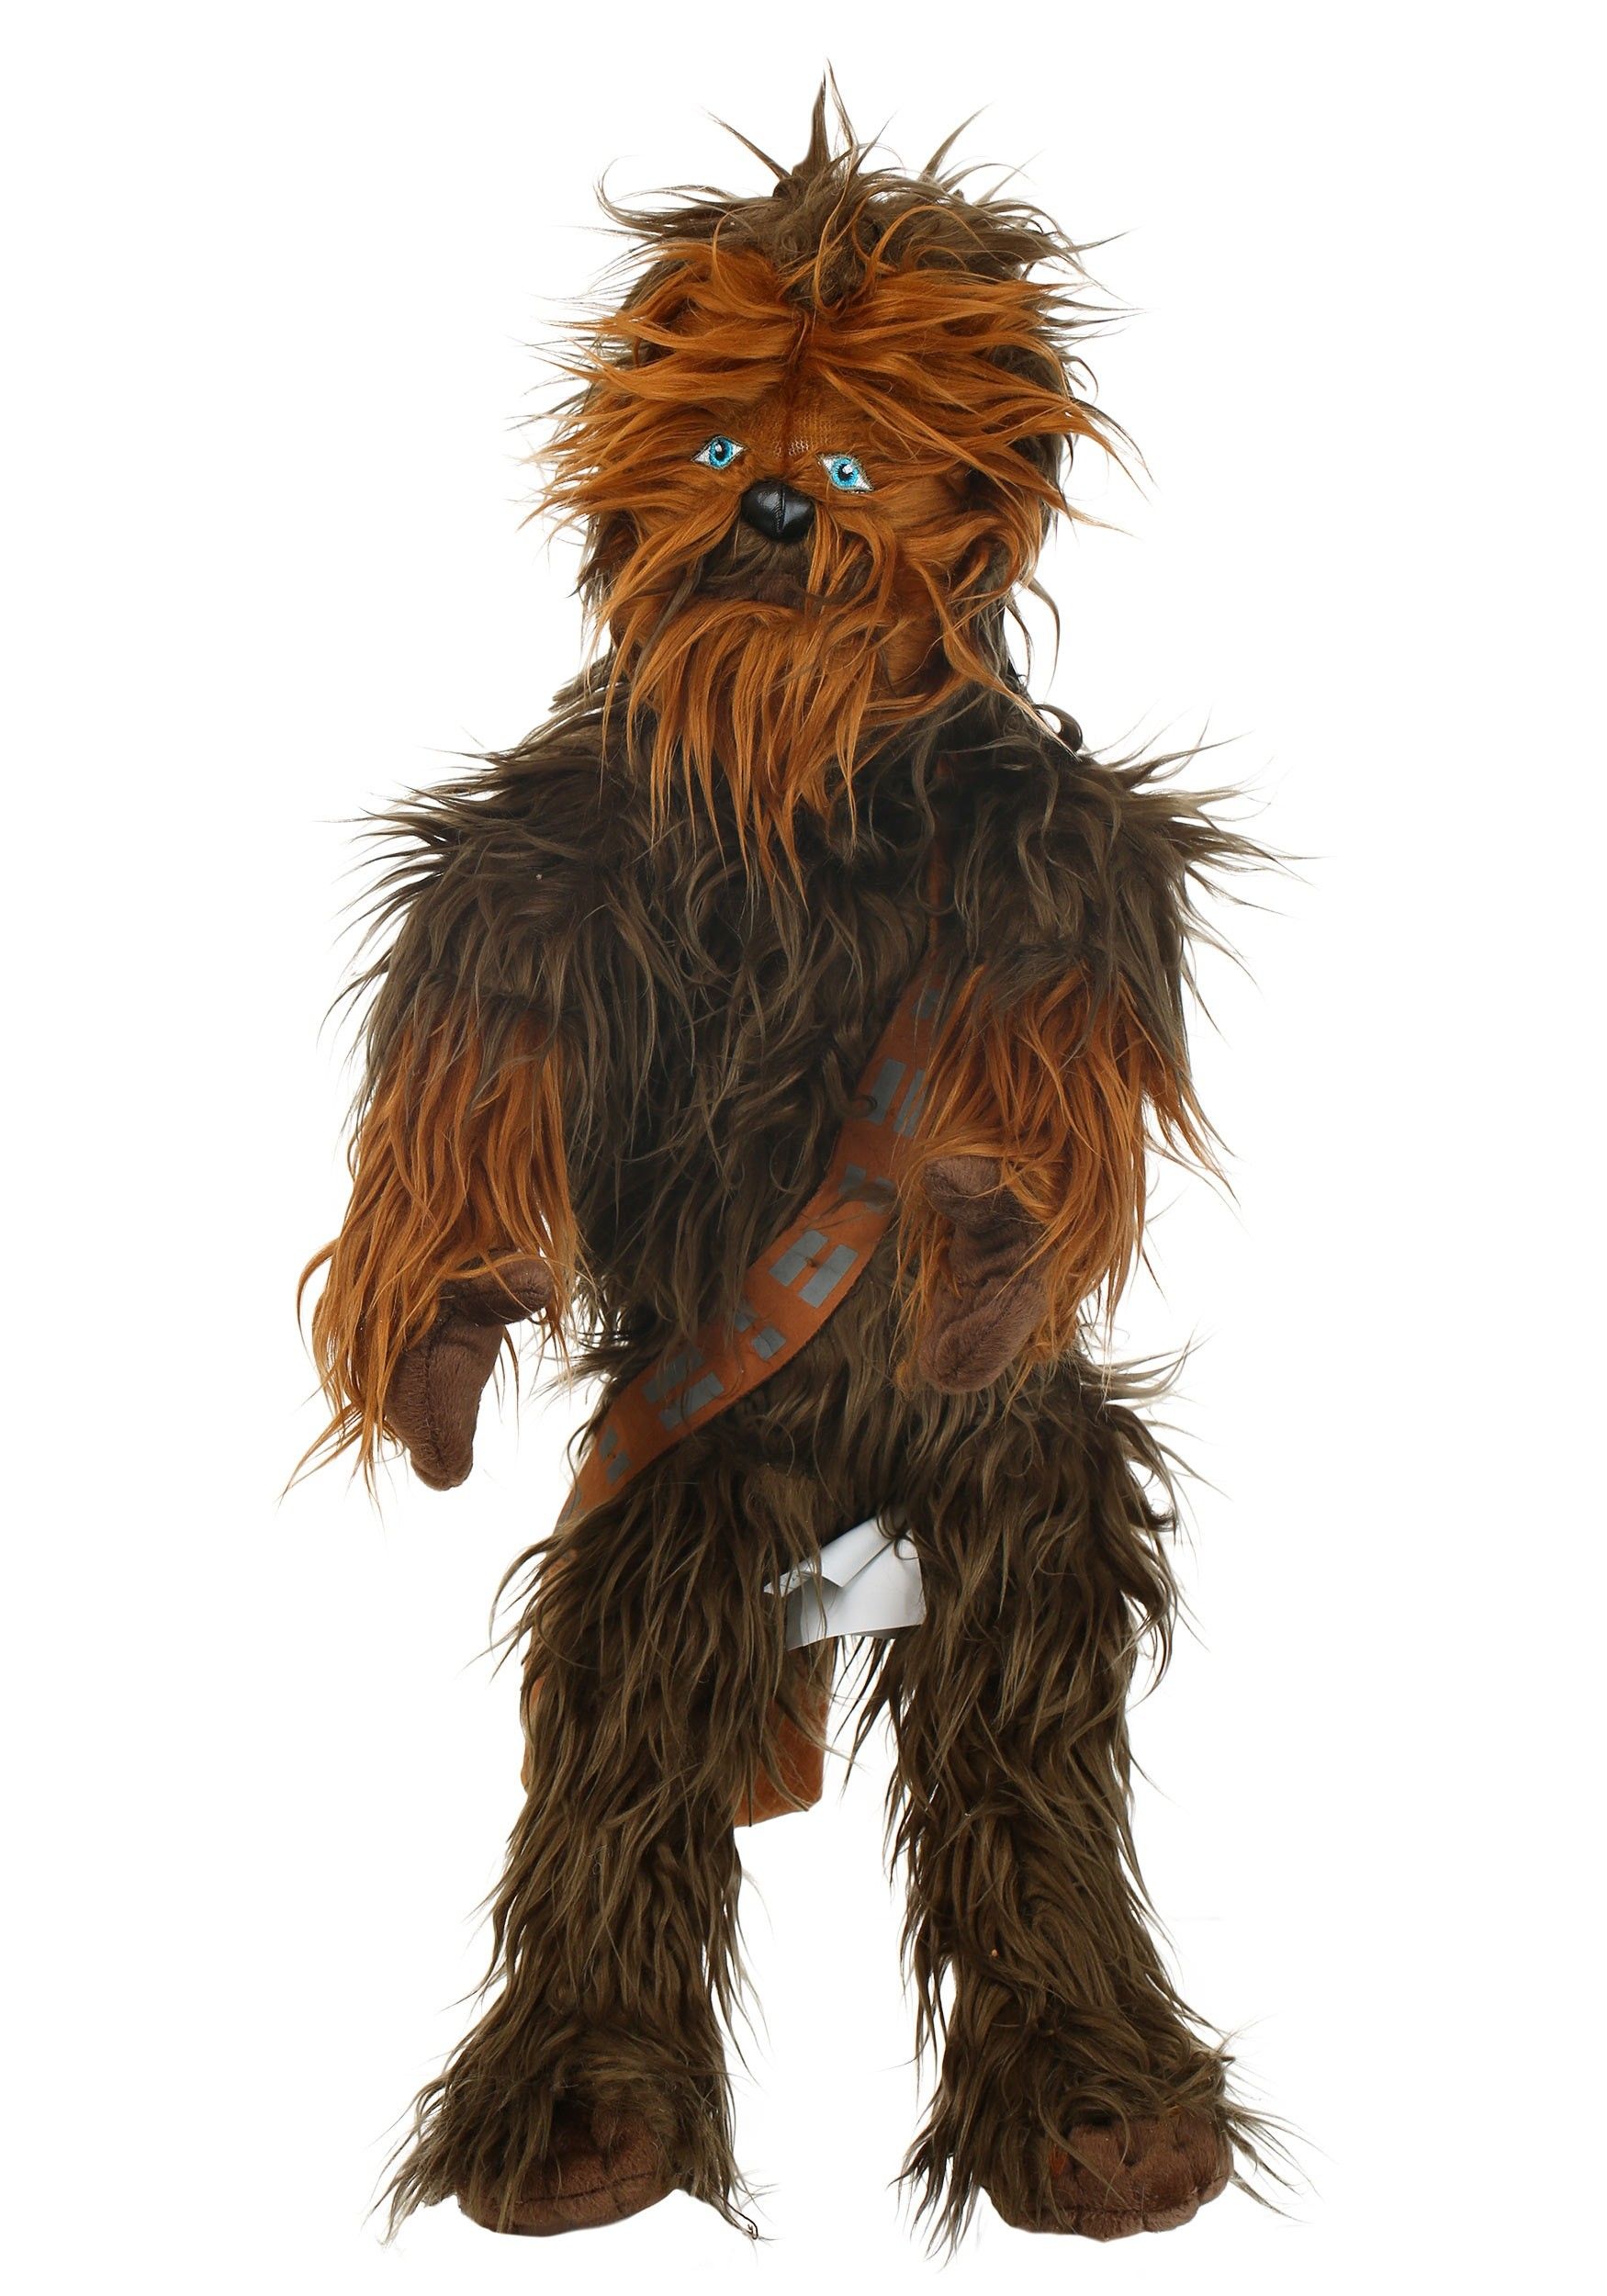 Chewbacca Wallpaper background picture